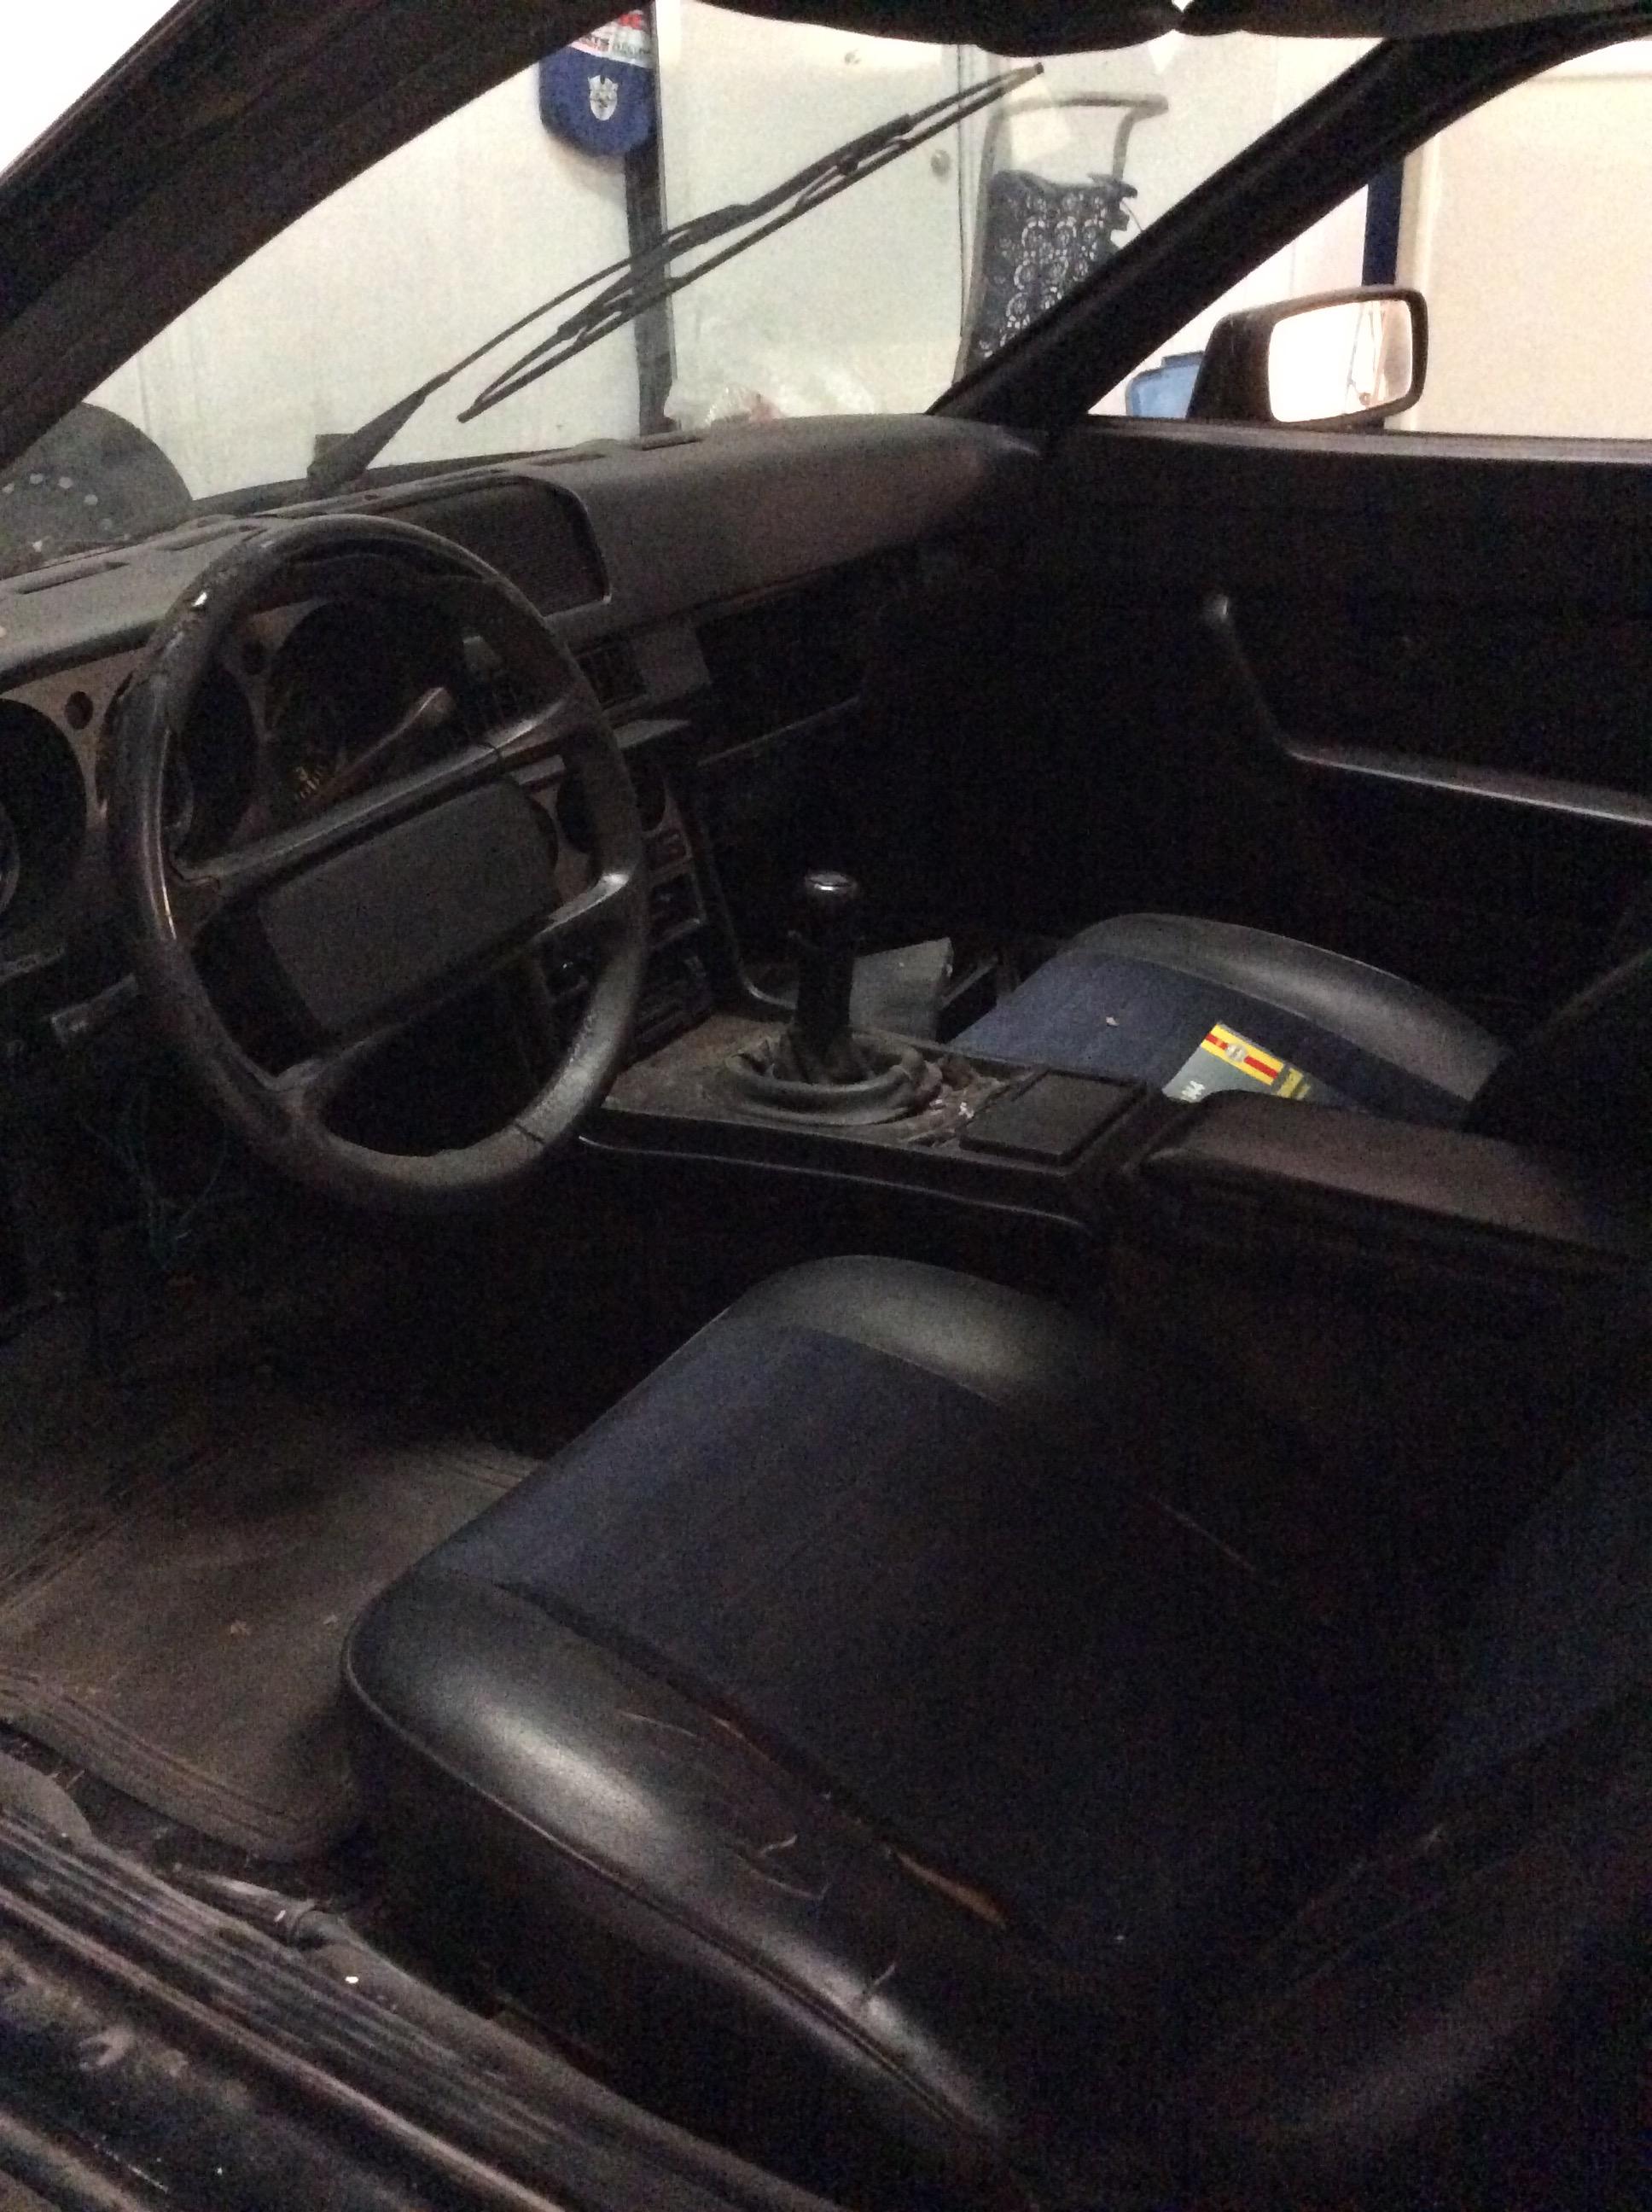 1983 Porsche 944, 26,000 Miles, Sun Roof, Spare Tire, Not Running, with Tit